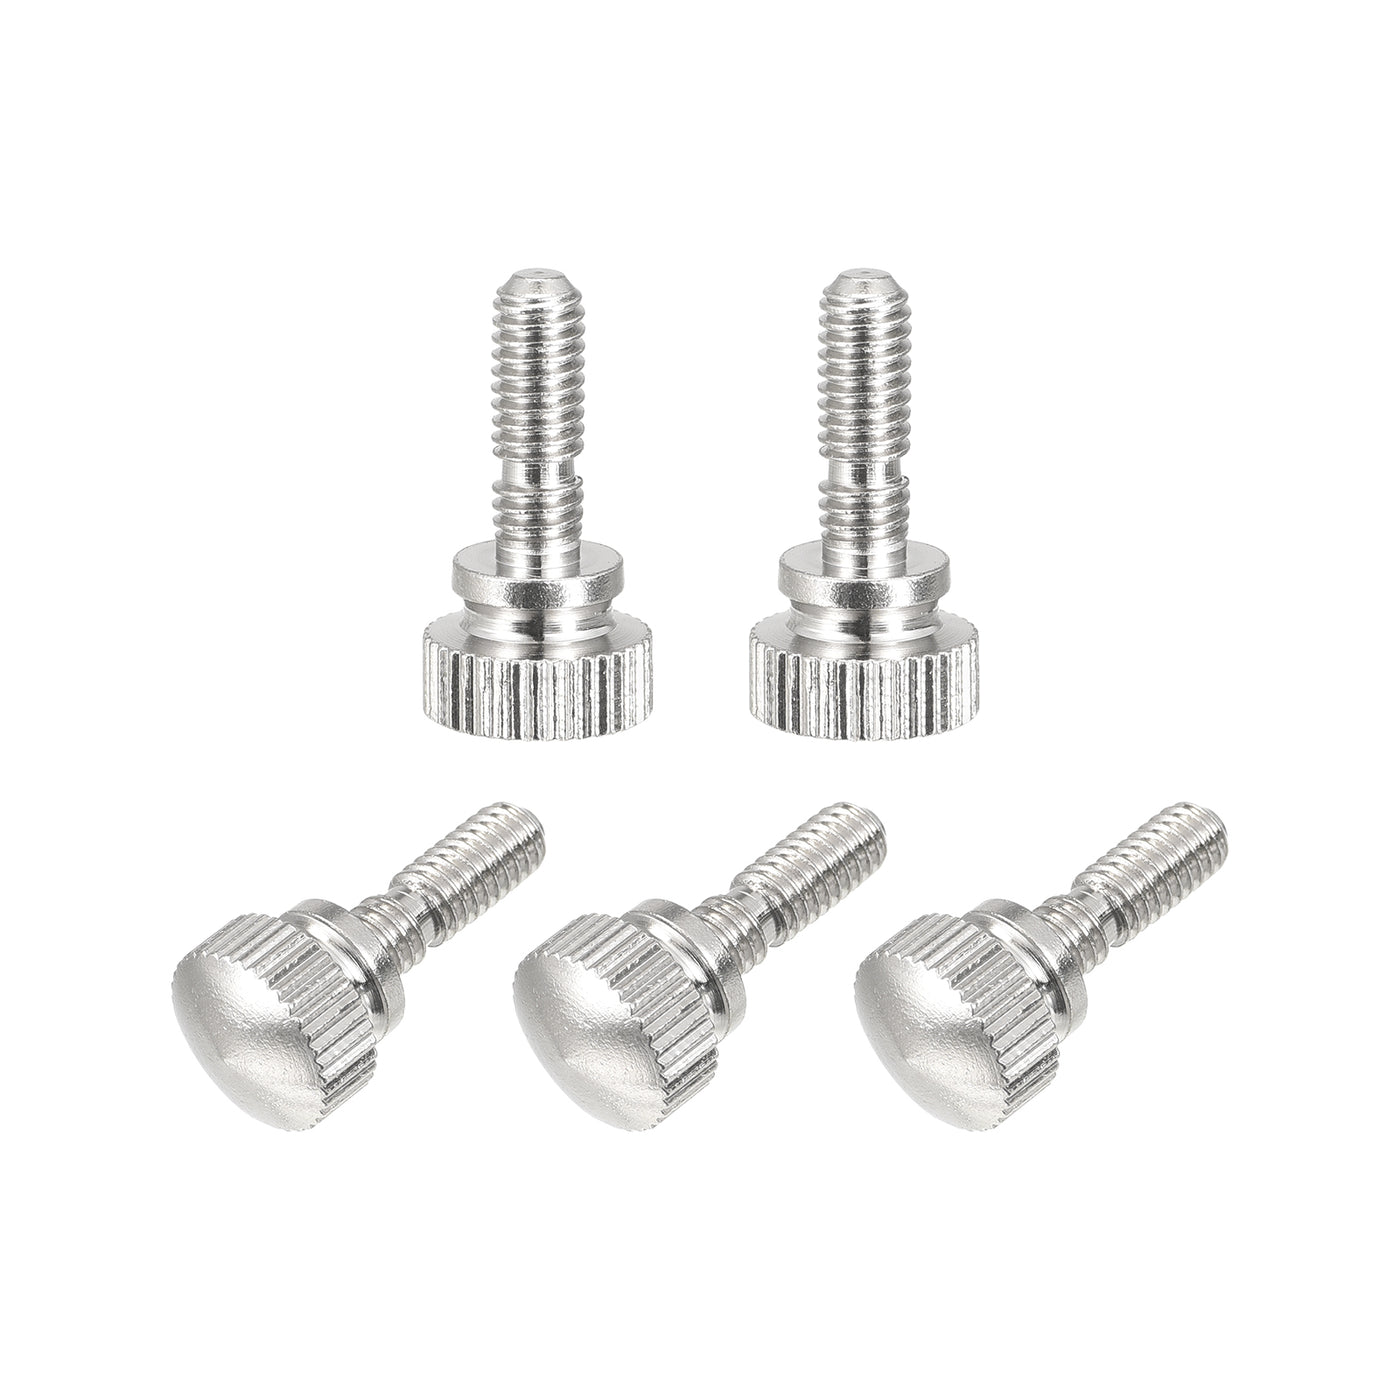 uxcell Uxcell Knurled Thumb Screws, M4x12mm Brass Slotted Thread Shoulder Bolts Grip Knobs Fasteners, Nickel Plated 5Pcs